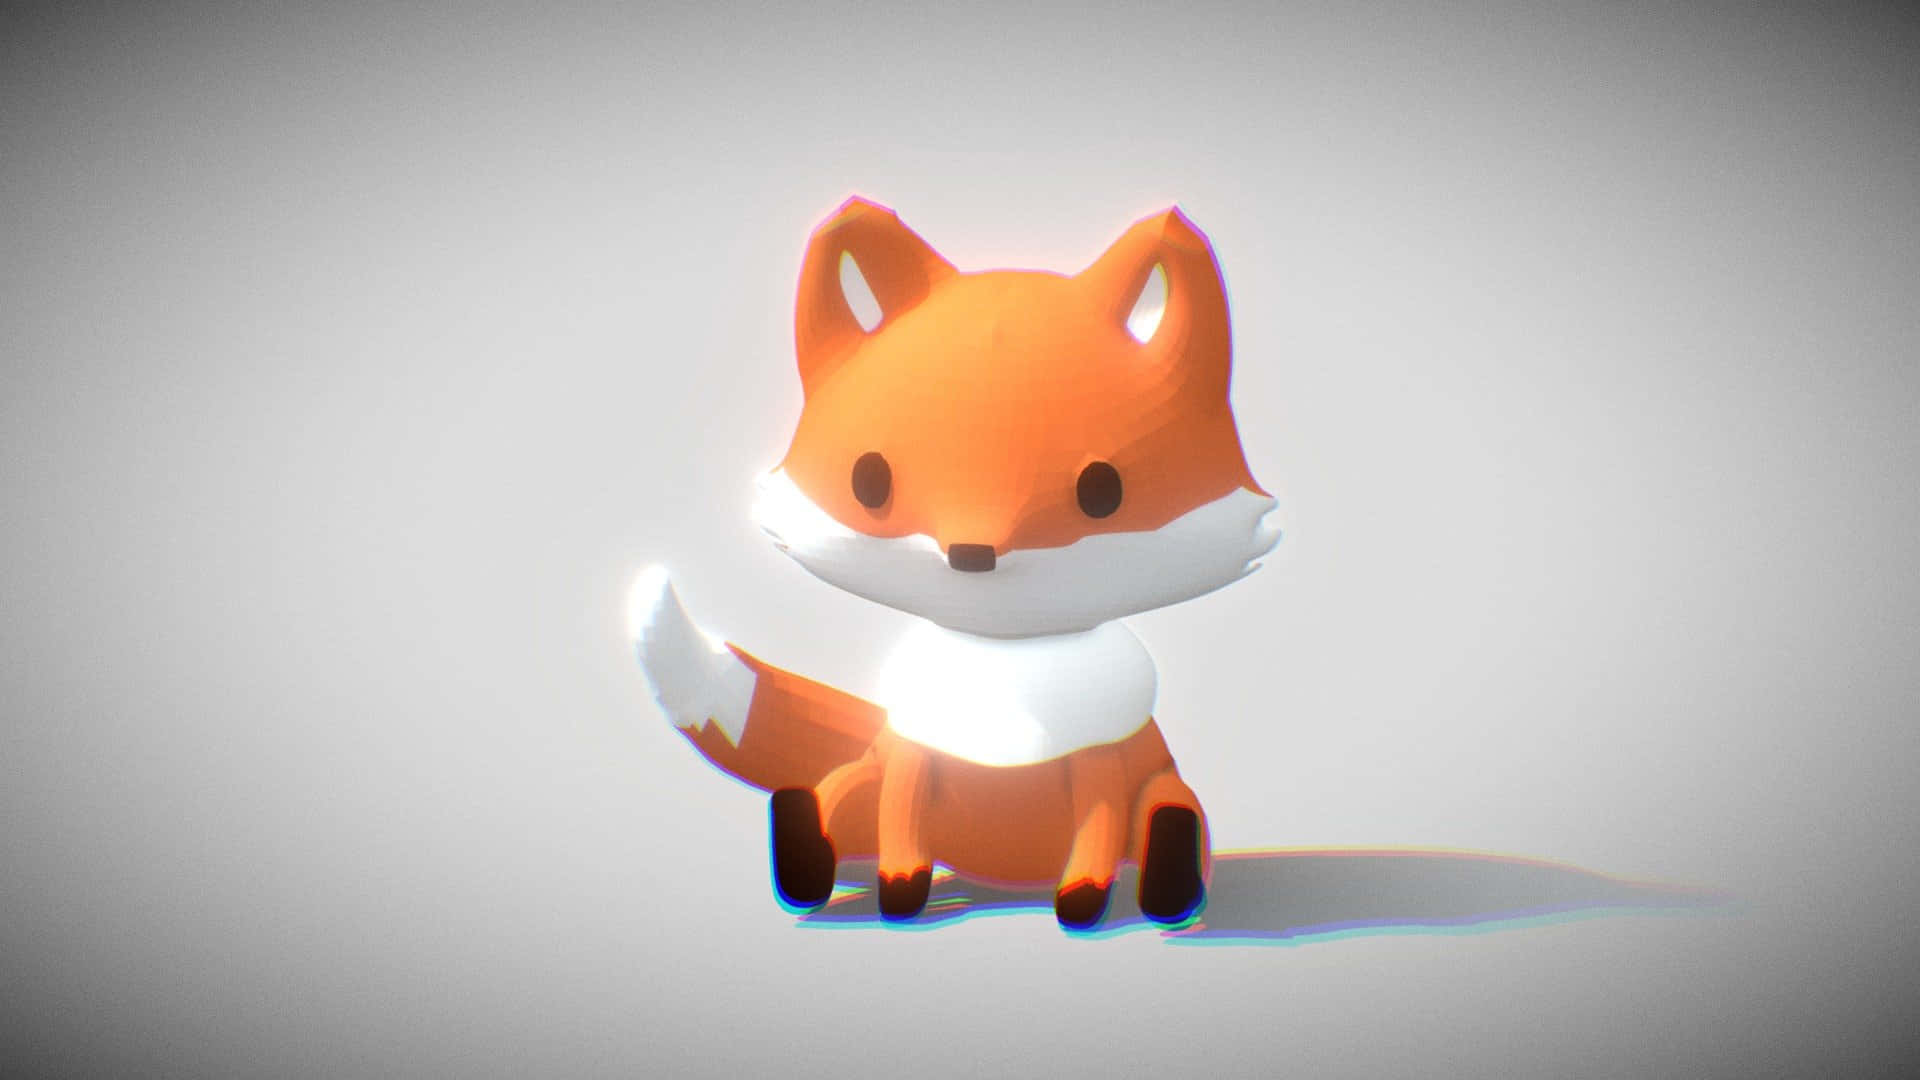 Check out this adorable and fluffy fox!